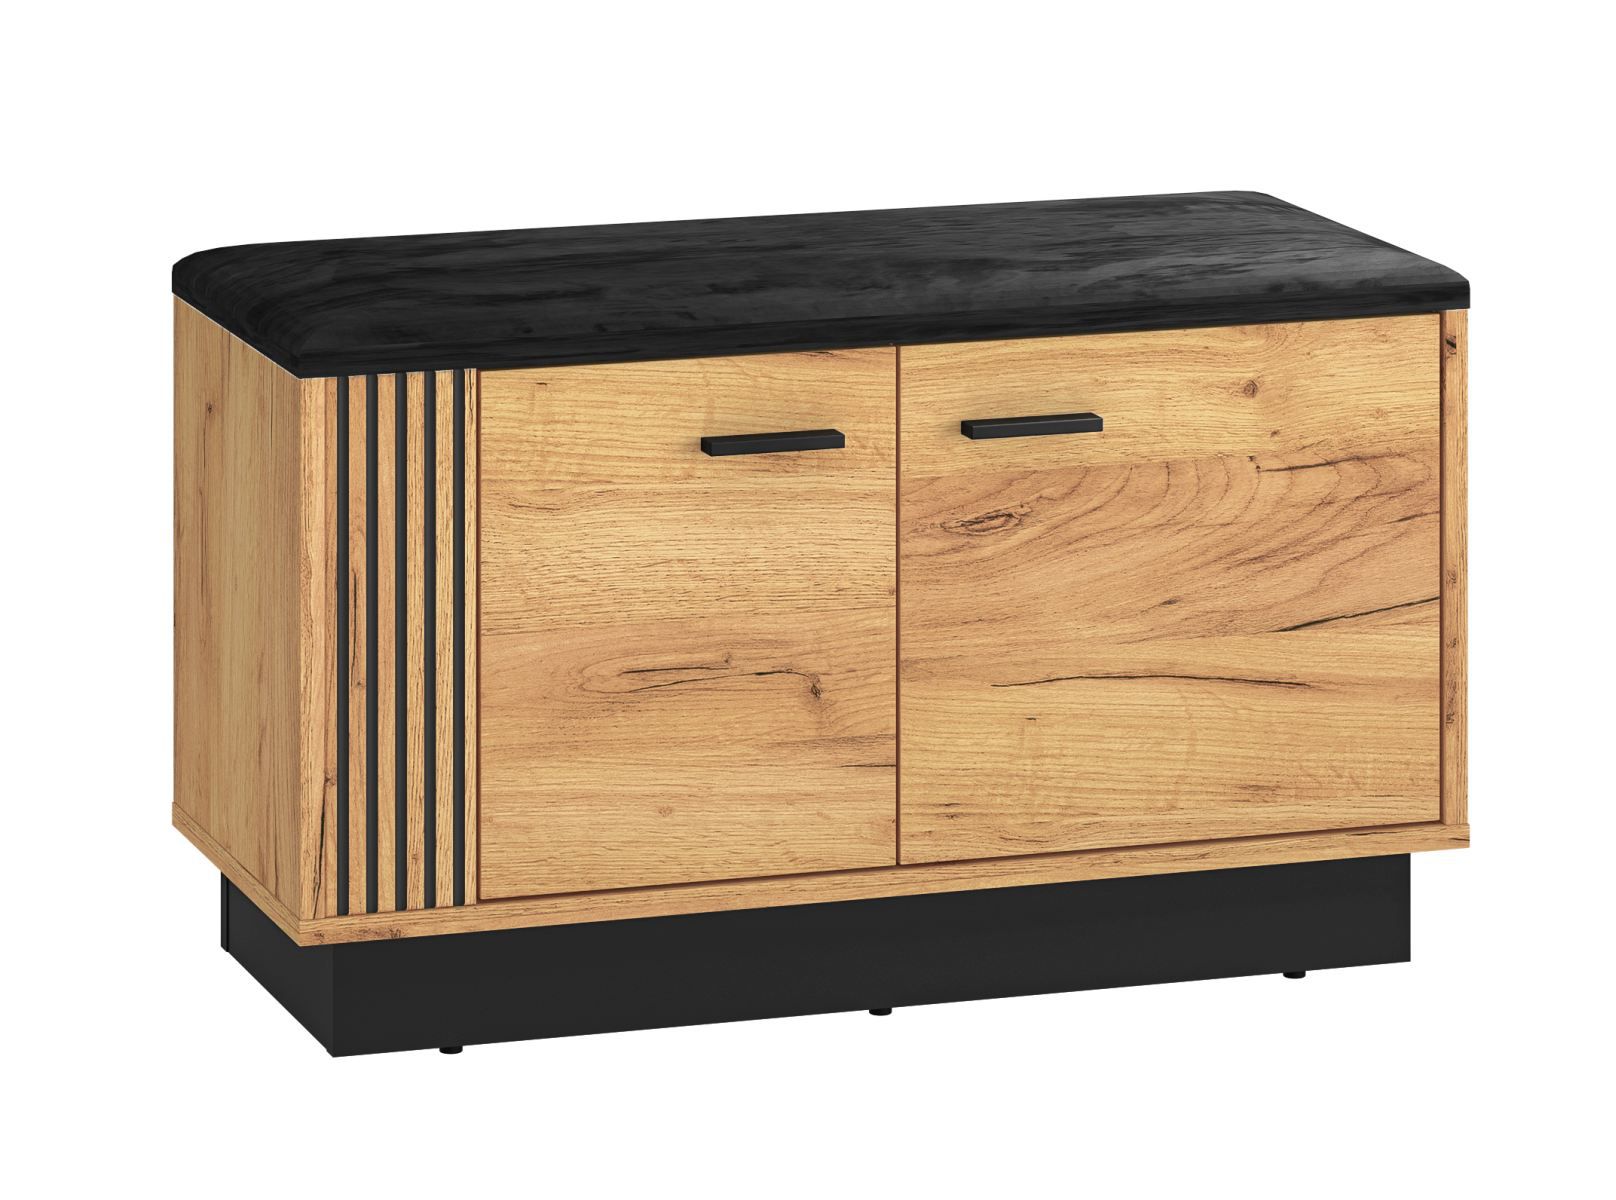 Bench with storage space / shoe cabinet Lautela 03, color: oak / black - Dimensions: 49 x 80 x 34 cm (H x W x D), with 2 doors and 2 compartments